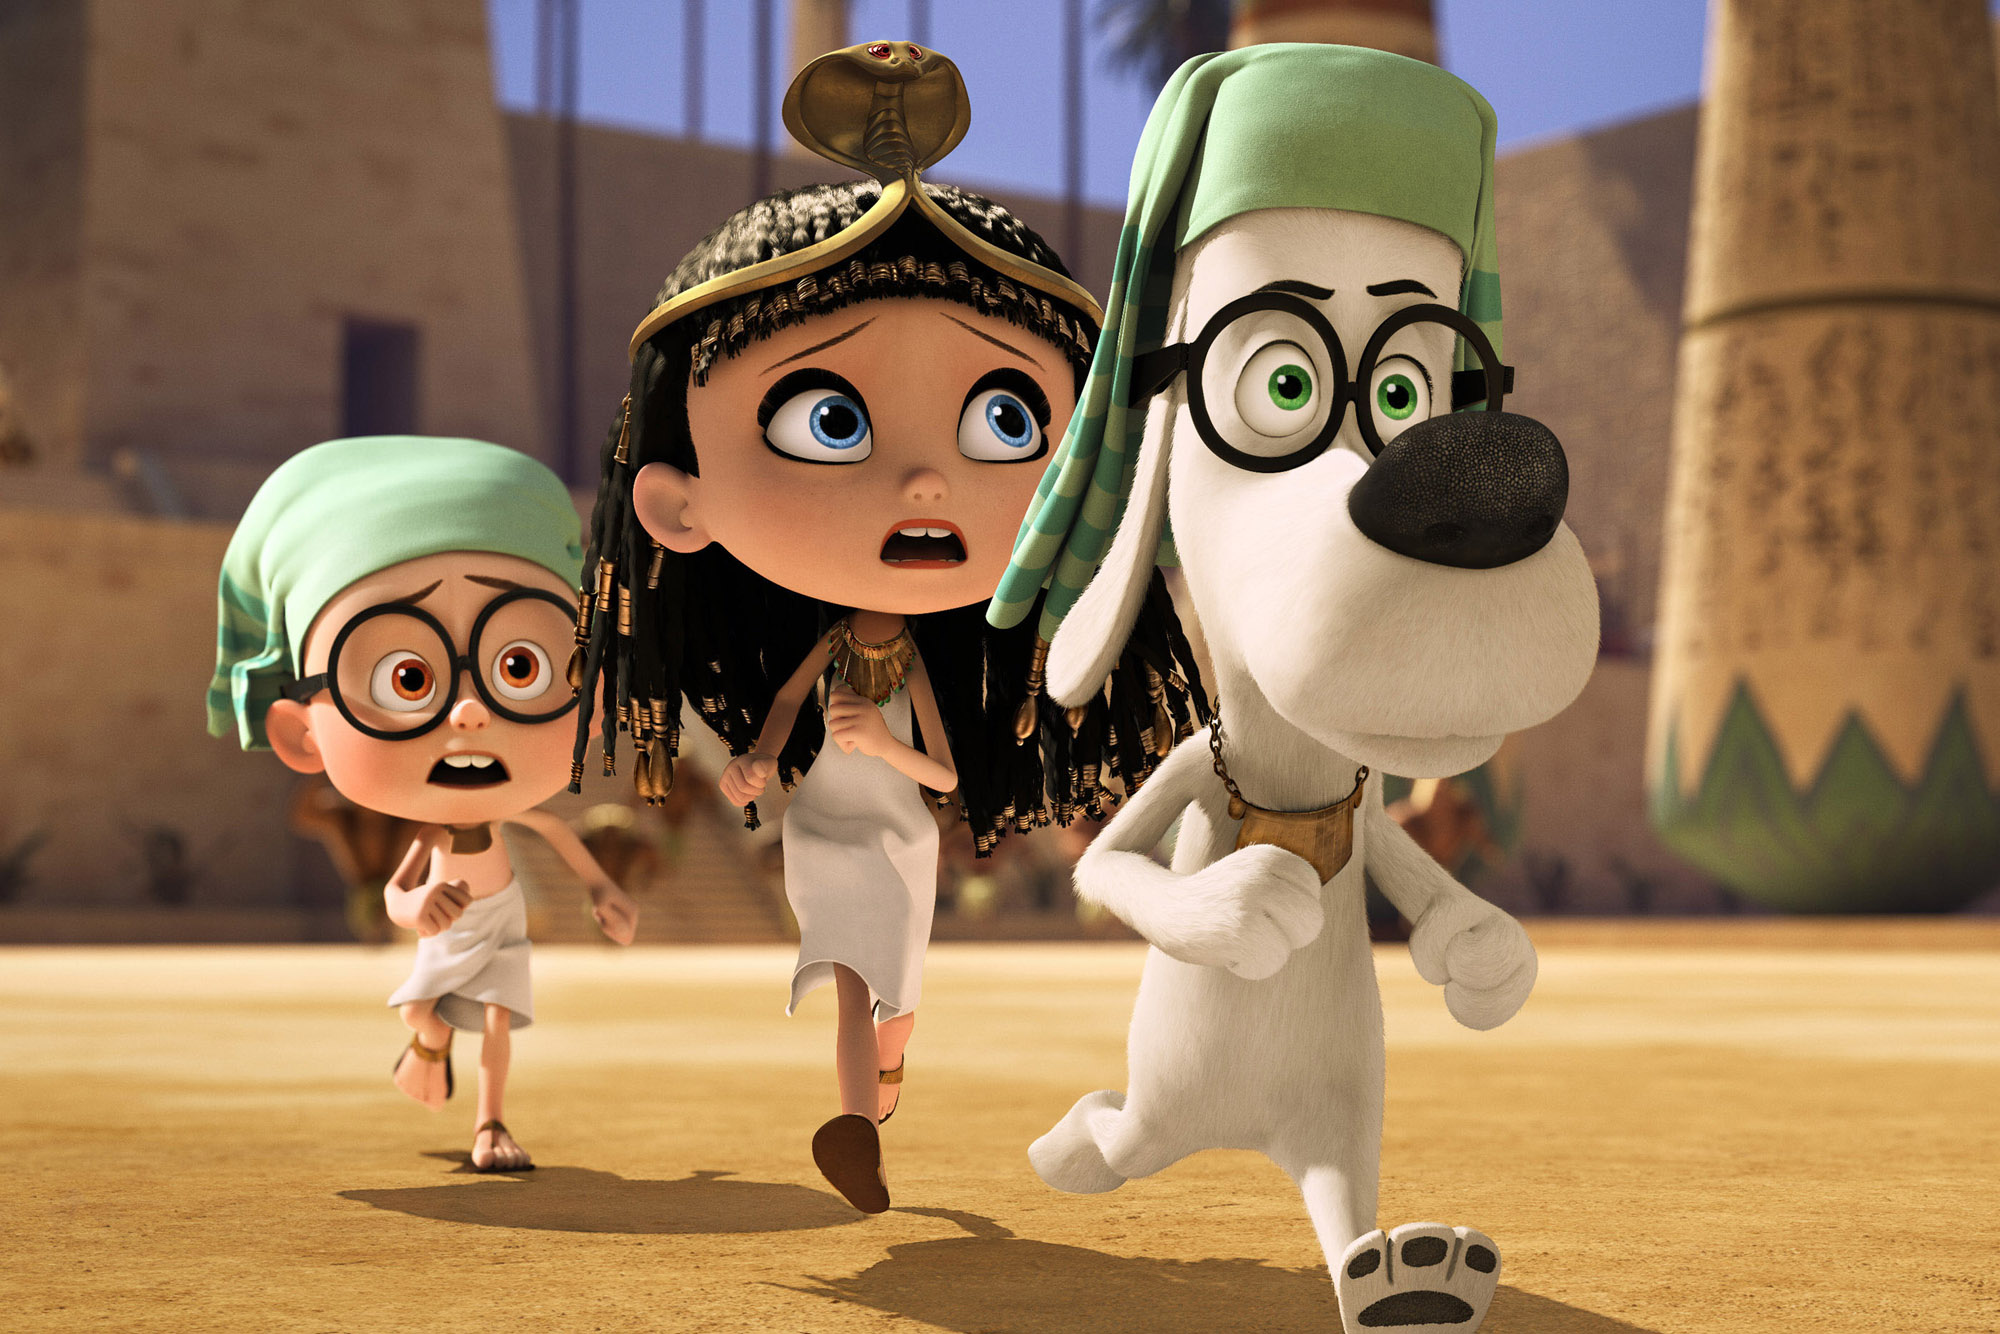 This image released by DreamWorks Animation shows Sherman, voiced by Max Charles, from left, Penny, voiced by Ariel Winter, and Mr. Peabody, voiced by Ty Burell, in a scene from "Mr Peabody &amp; Sherman." (Dreamworks Animation/AP)